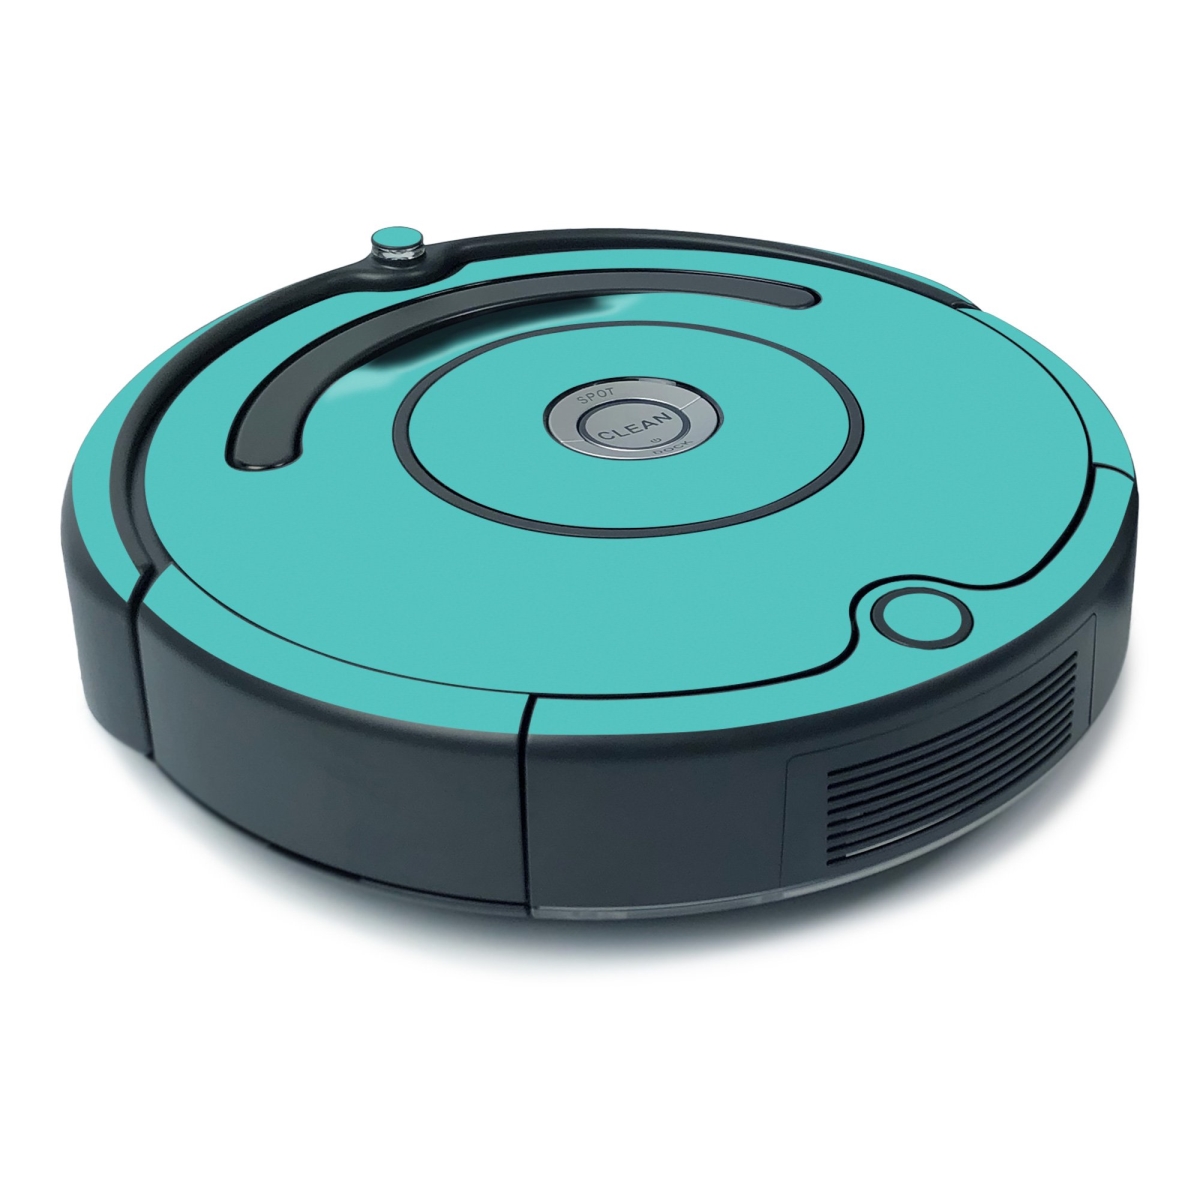 Picture of MightySkins IRRO675MIN-Solid Turquoise Skin for iRobot Roomba 675 Minimal Coverage - Solid Turquoise